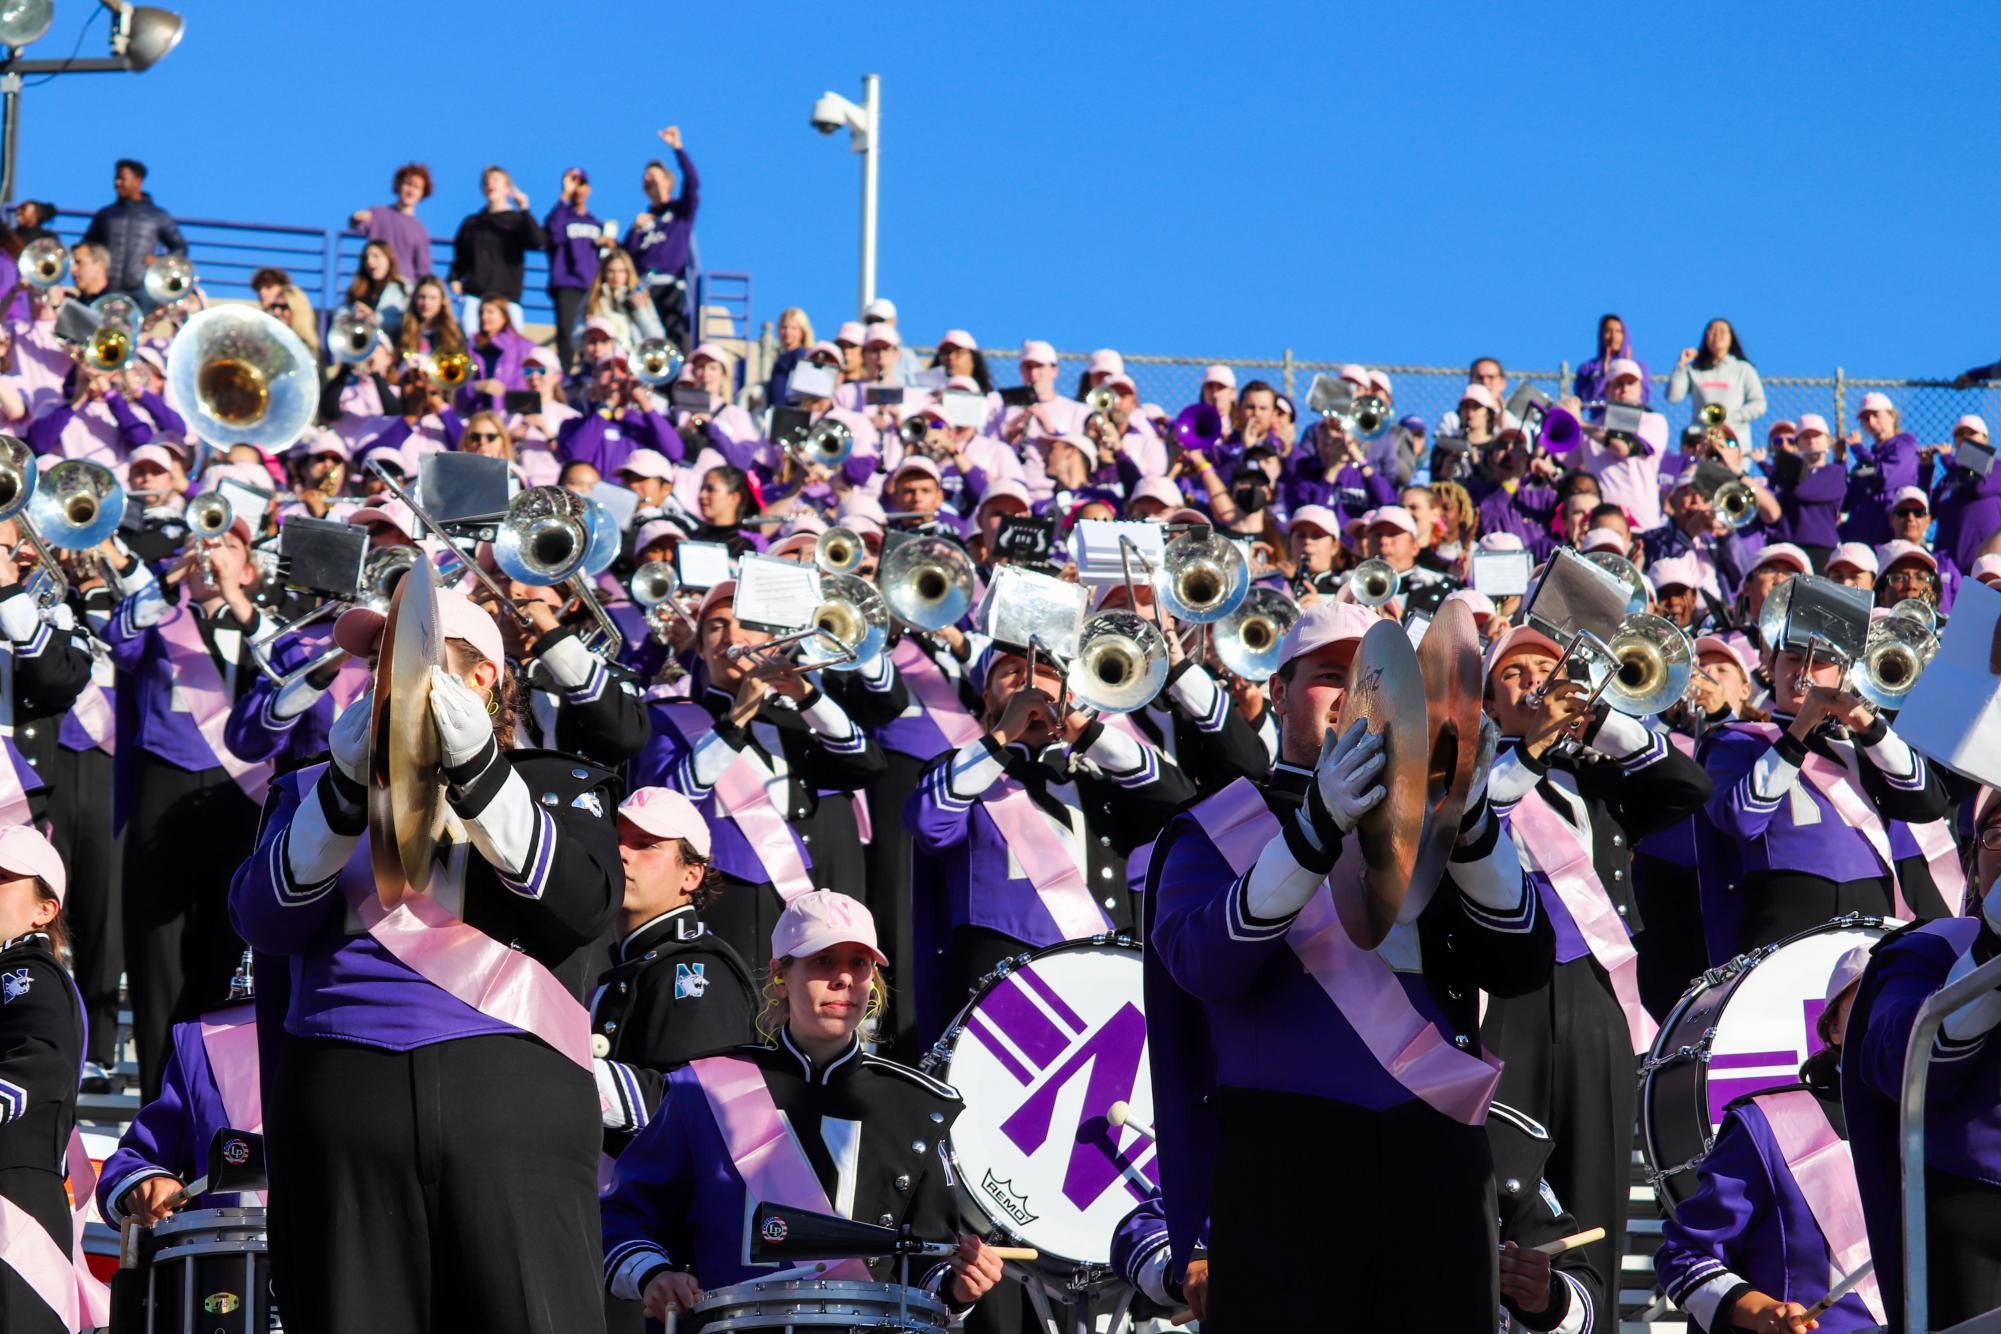 Marching band members in purple uniforms and pink sashes play their instruments.